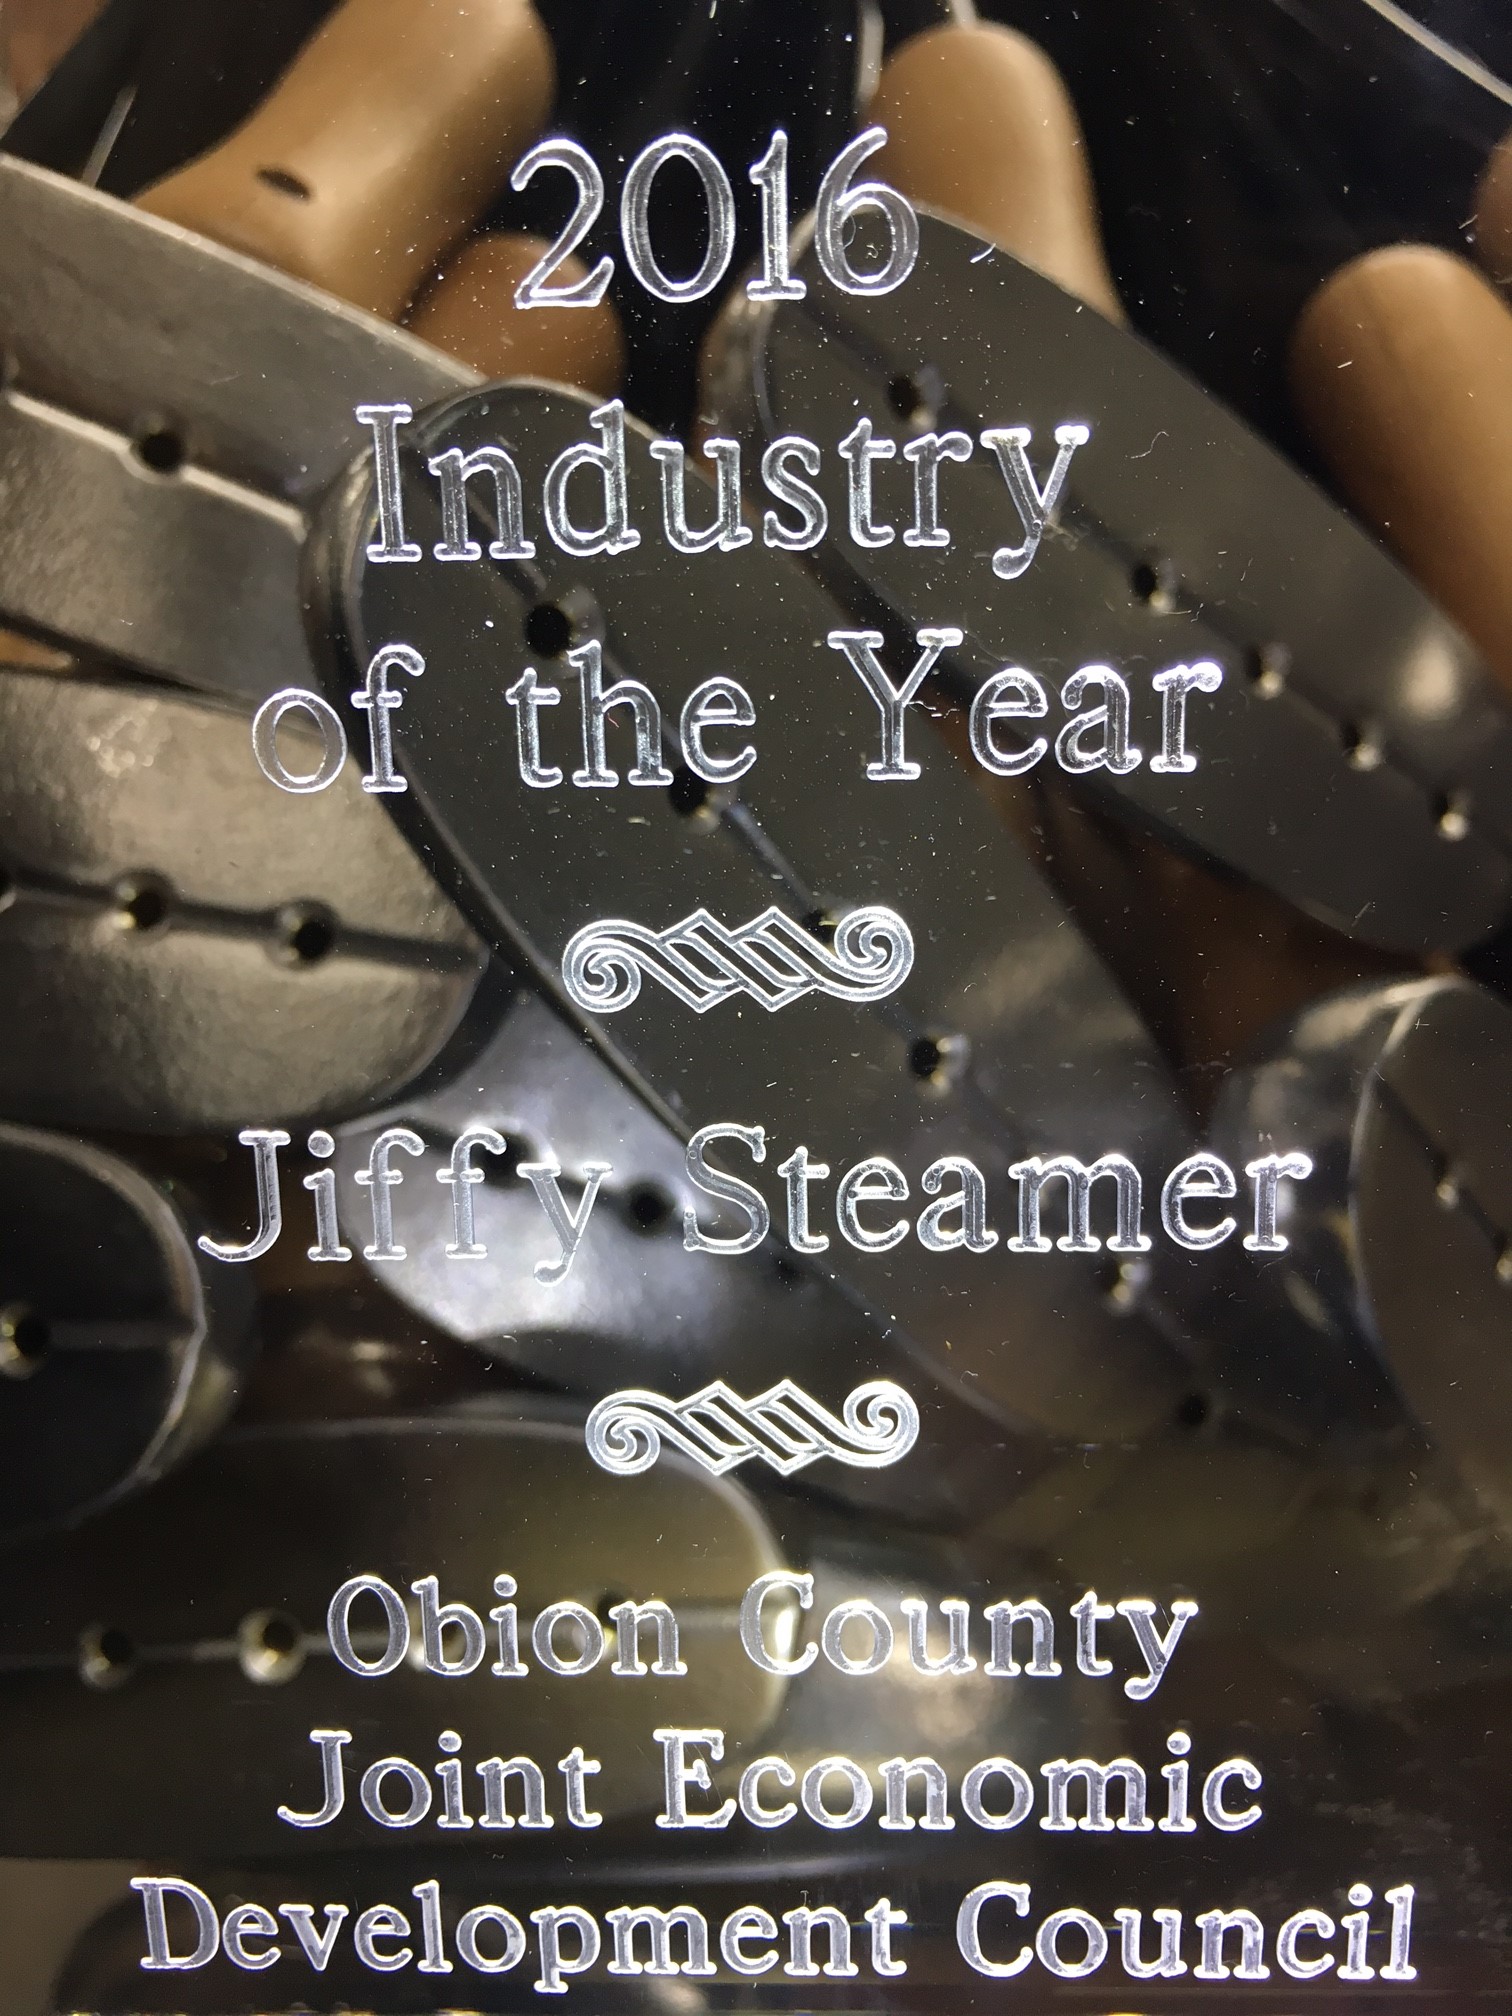 2016-industry-of-the-year-award-jiffy-steamer